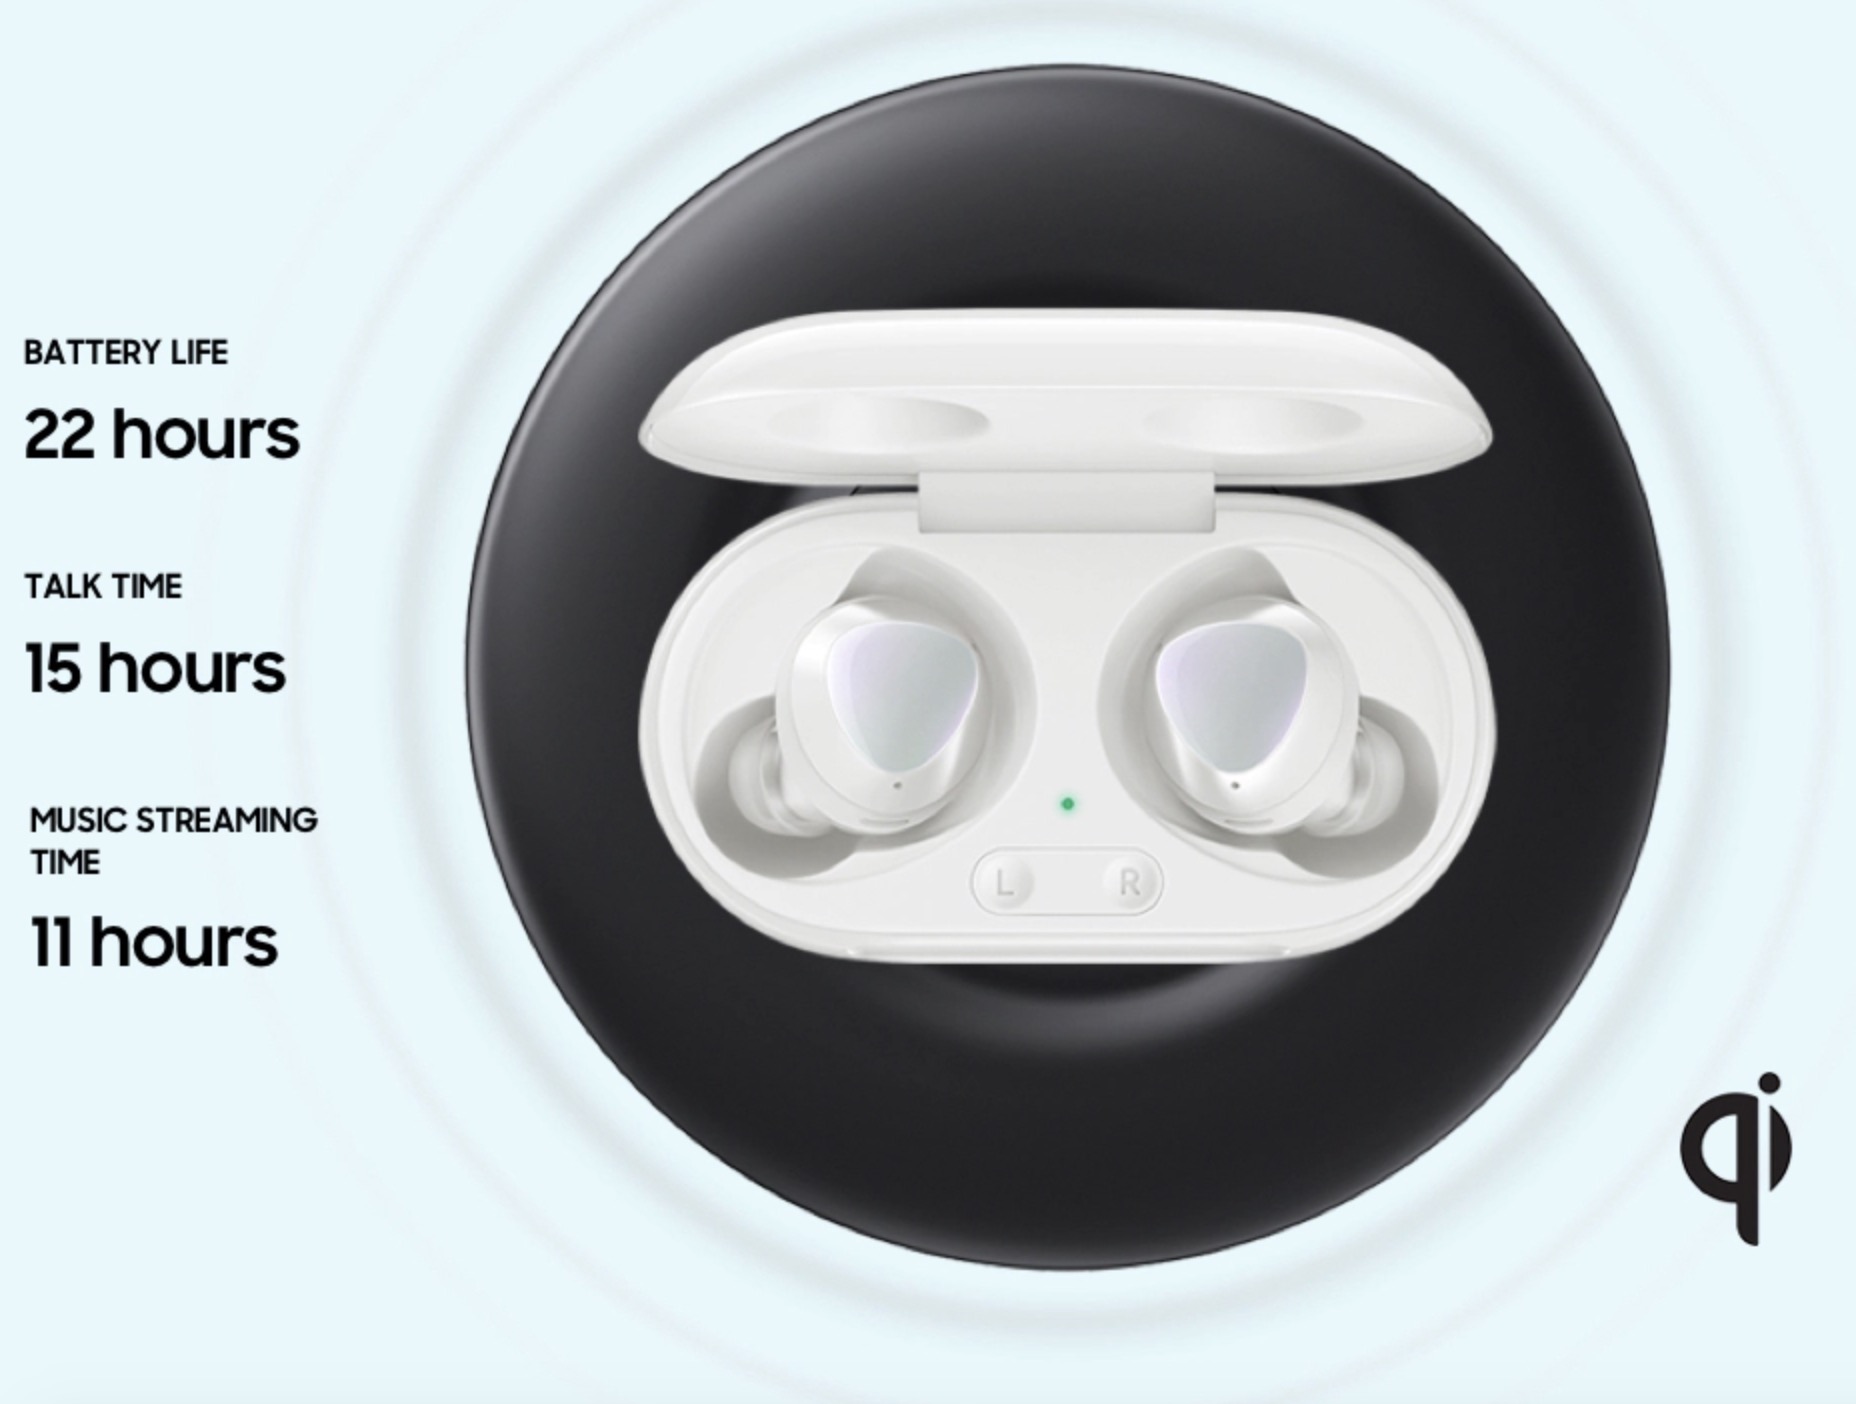 5 Reasons to Buy the Galaxy Buds Plus & 4 Reasons Not to